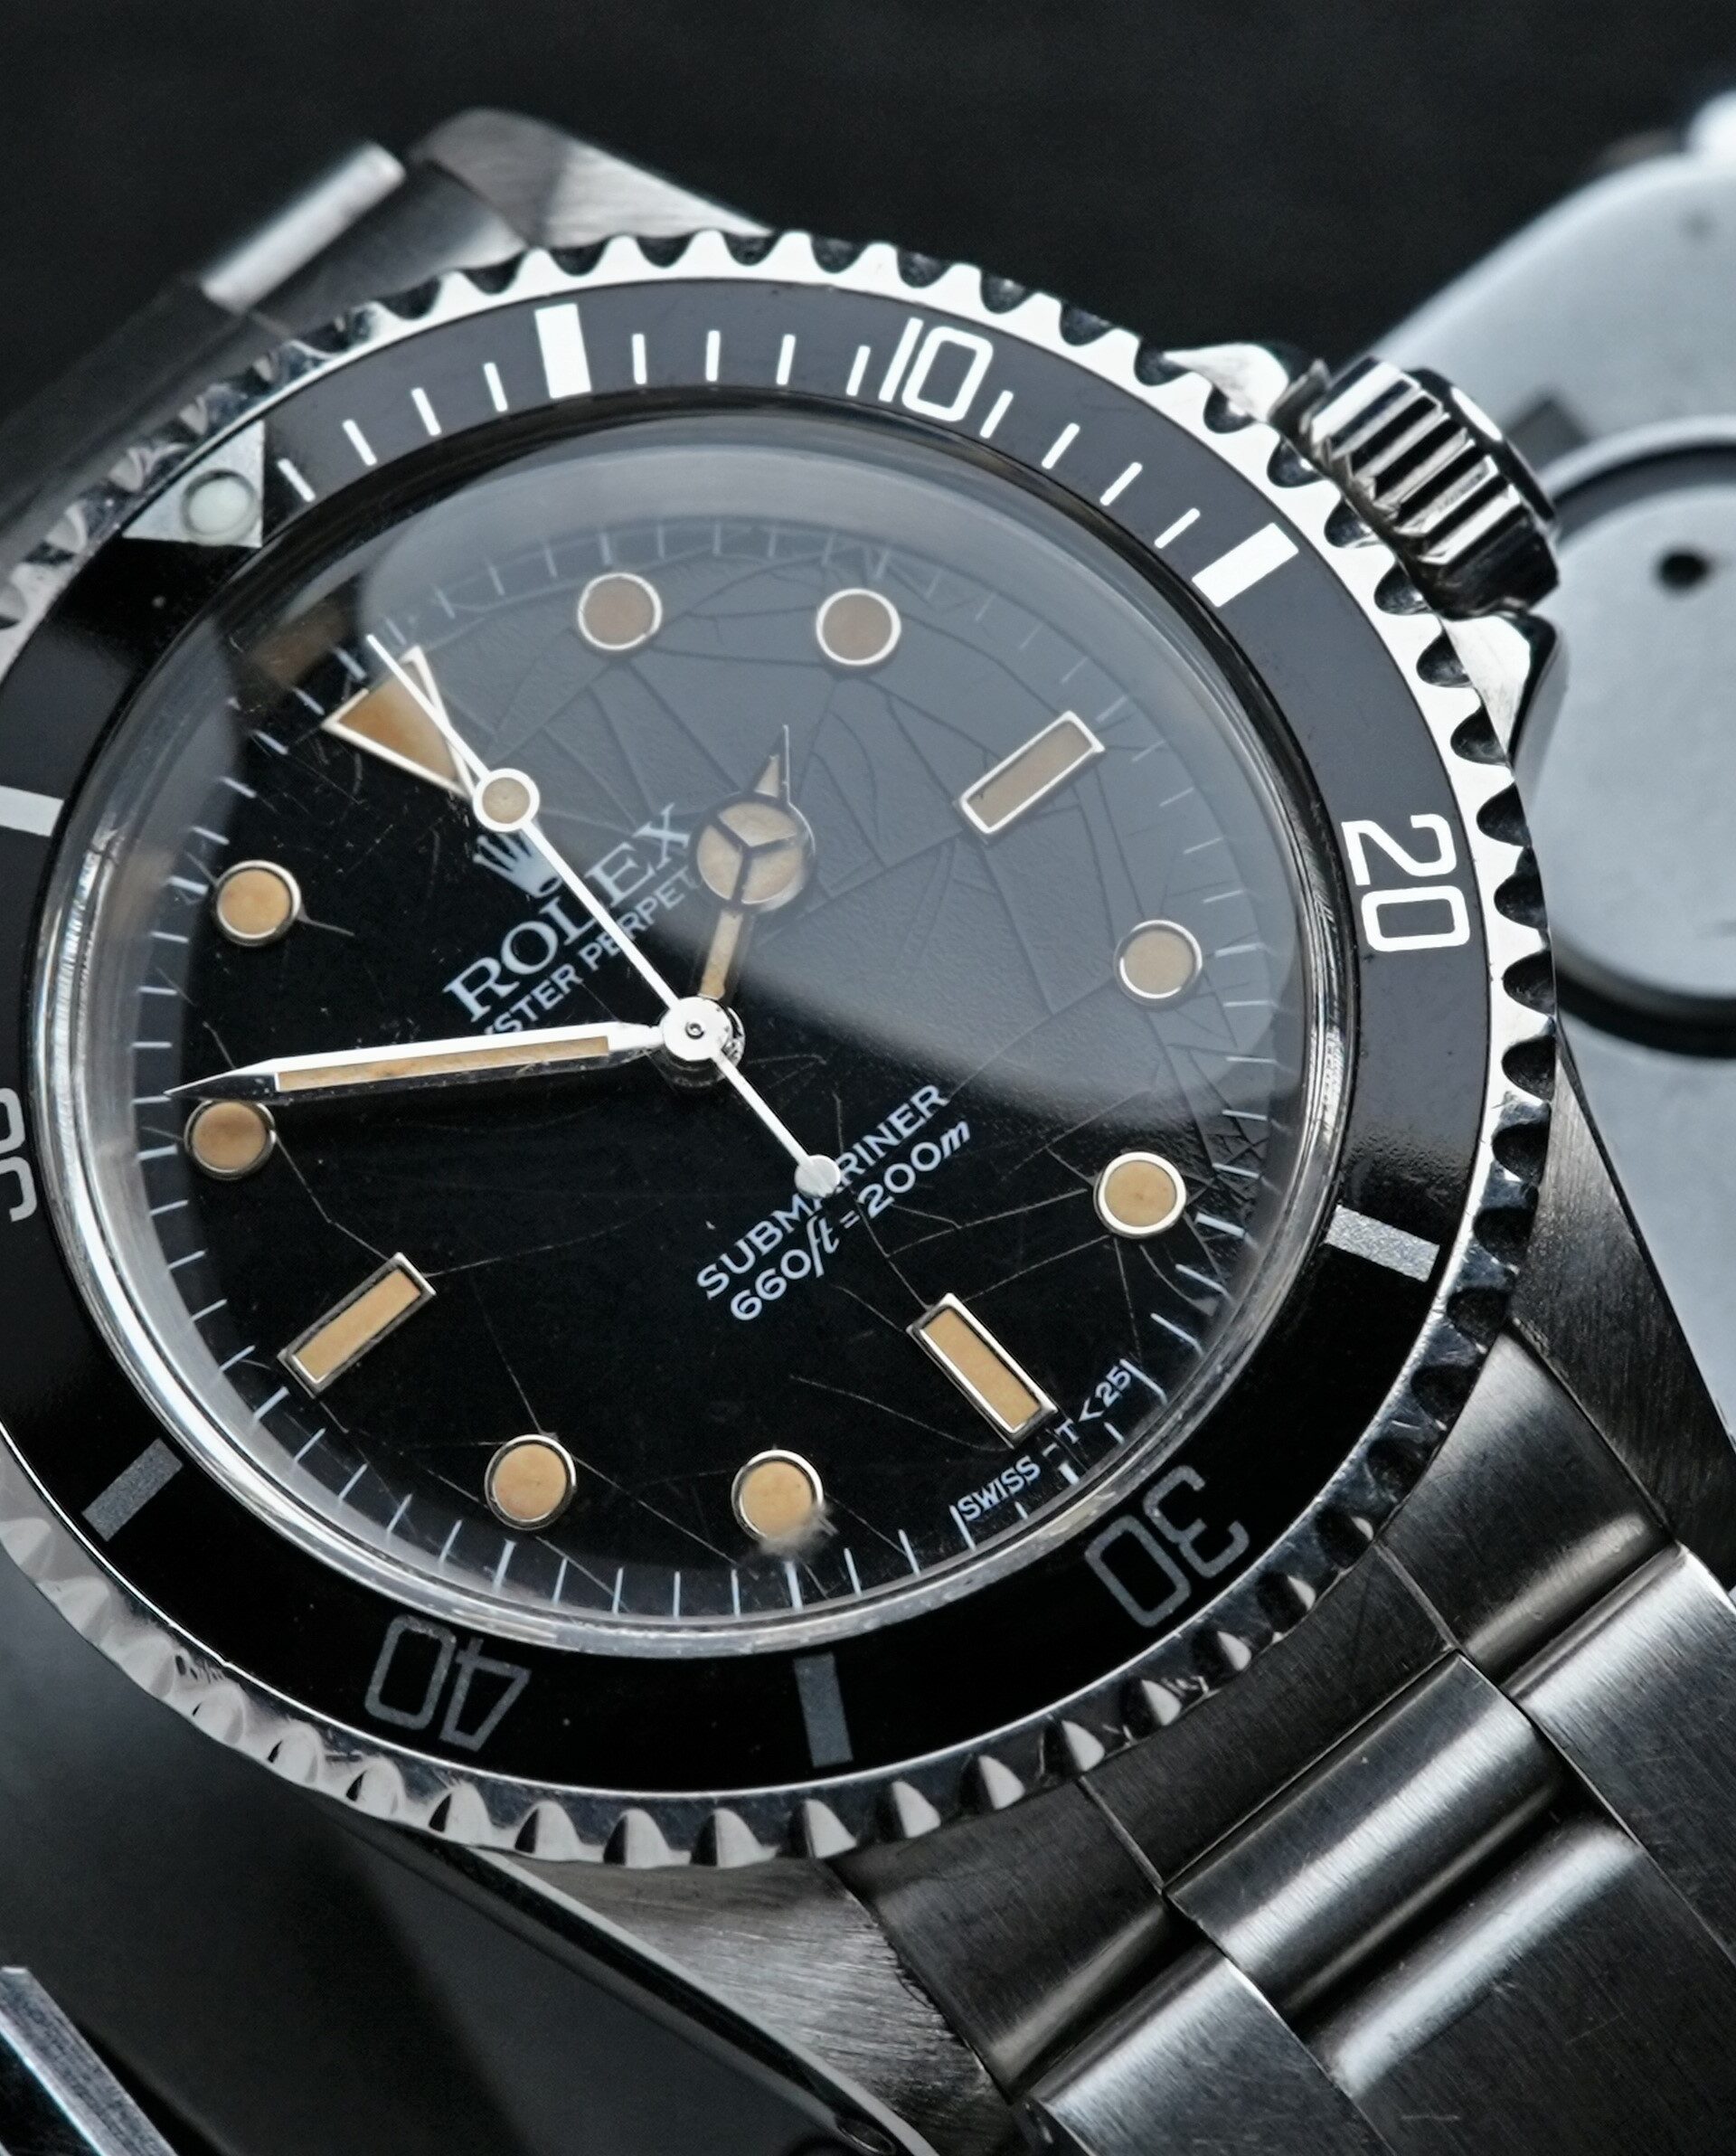 Rolex Submariner 5513 1979 Mark 3. Spider dial shown under white lighting which brings out the spider dial brilliantly.